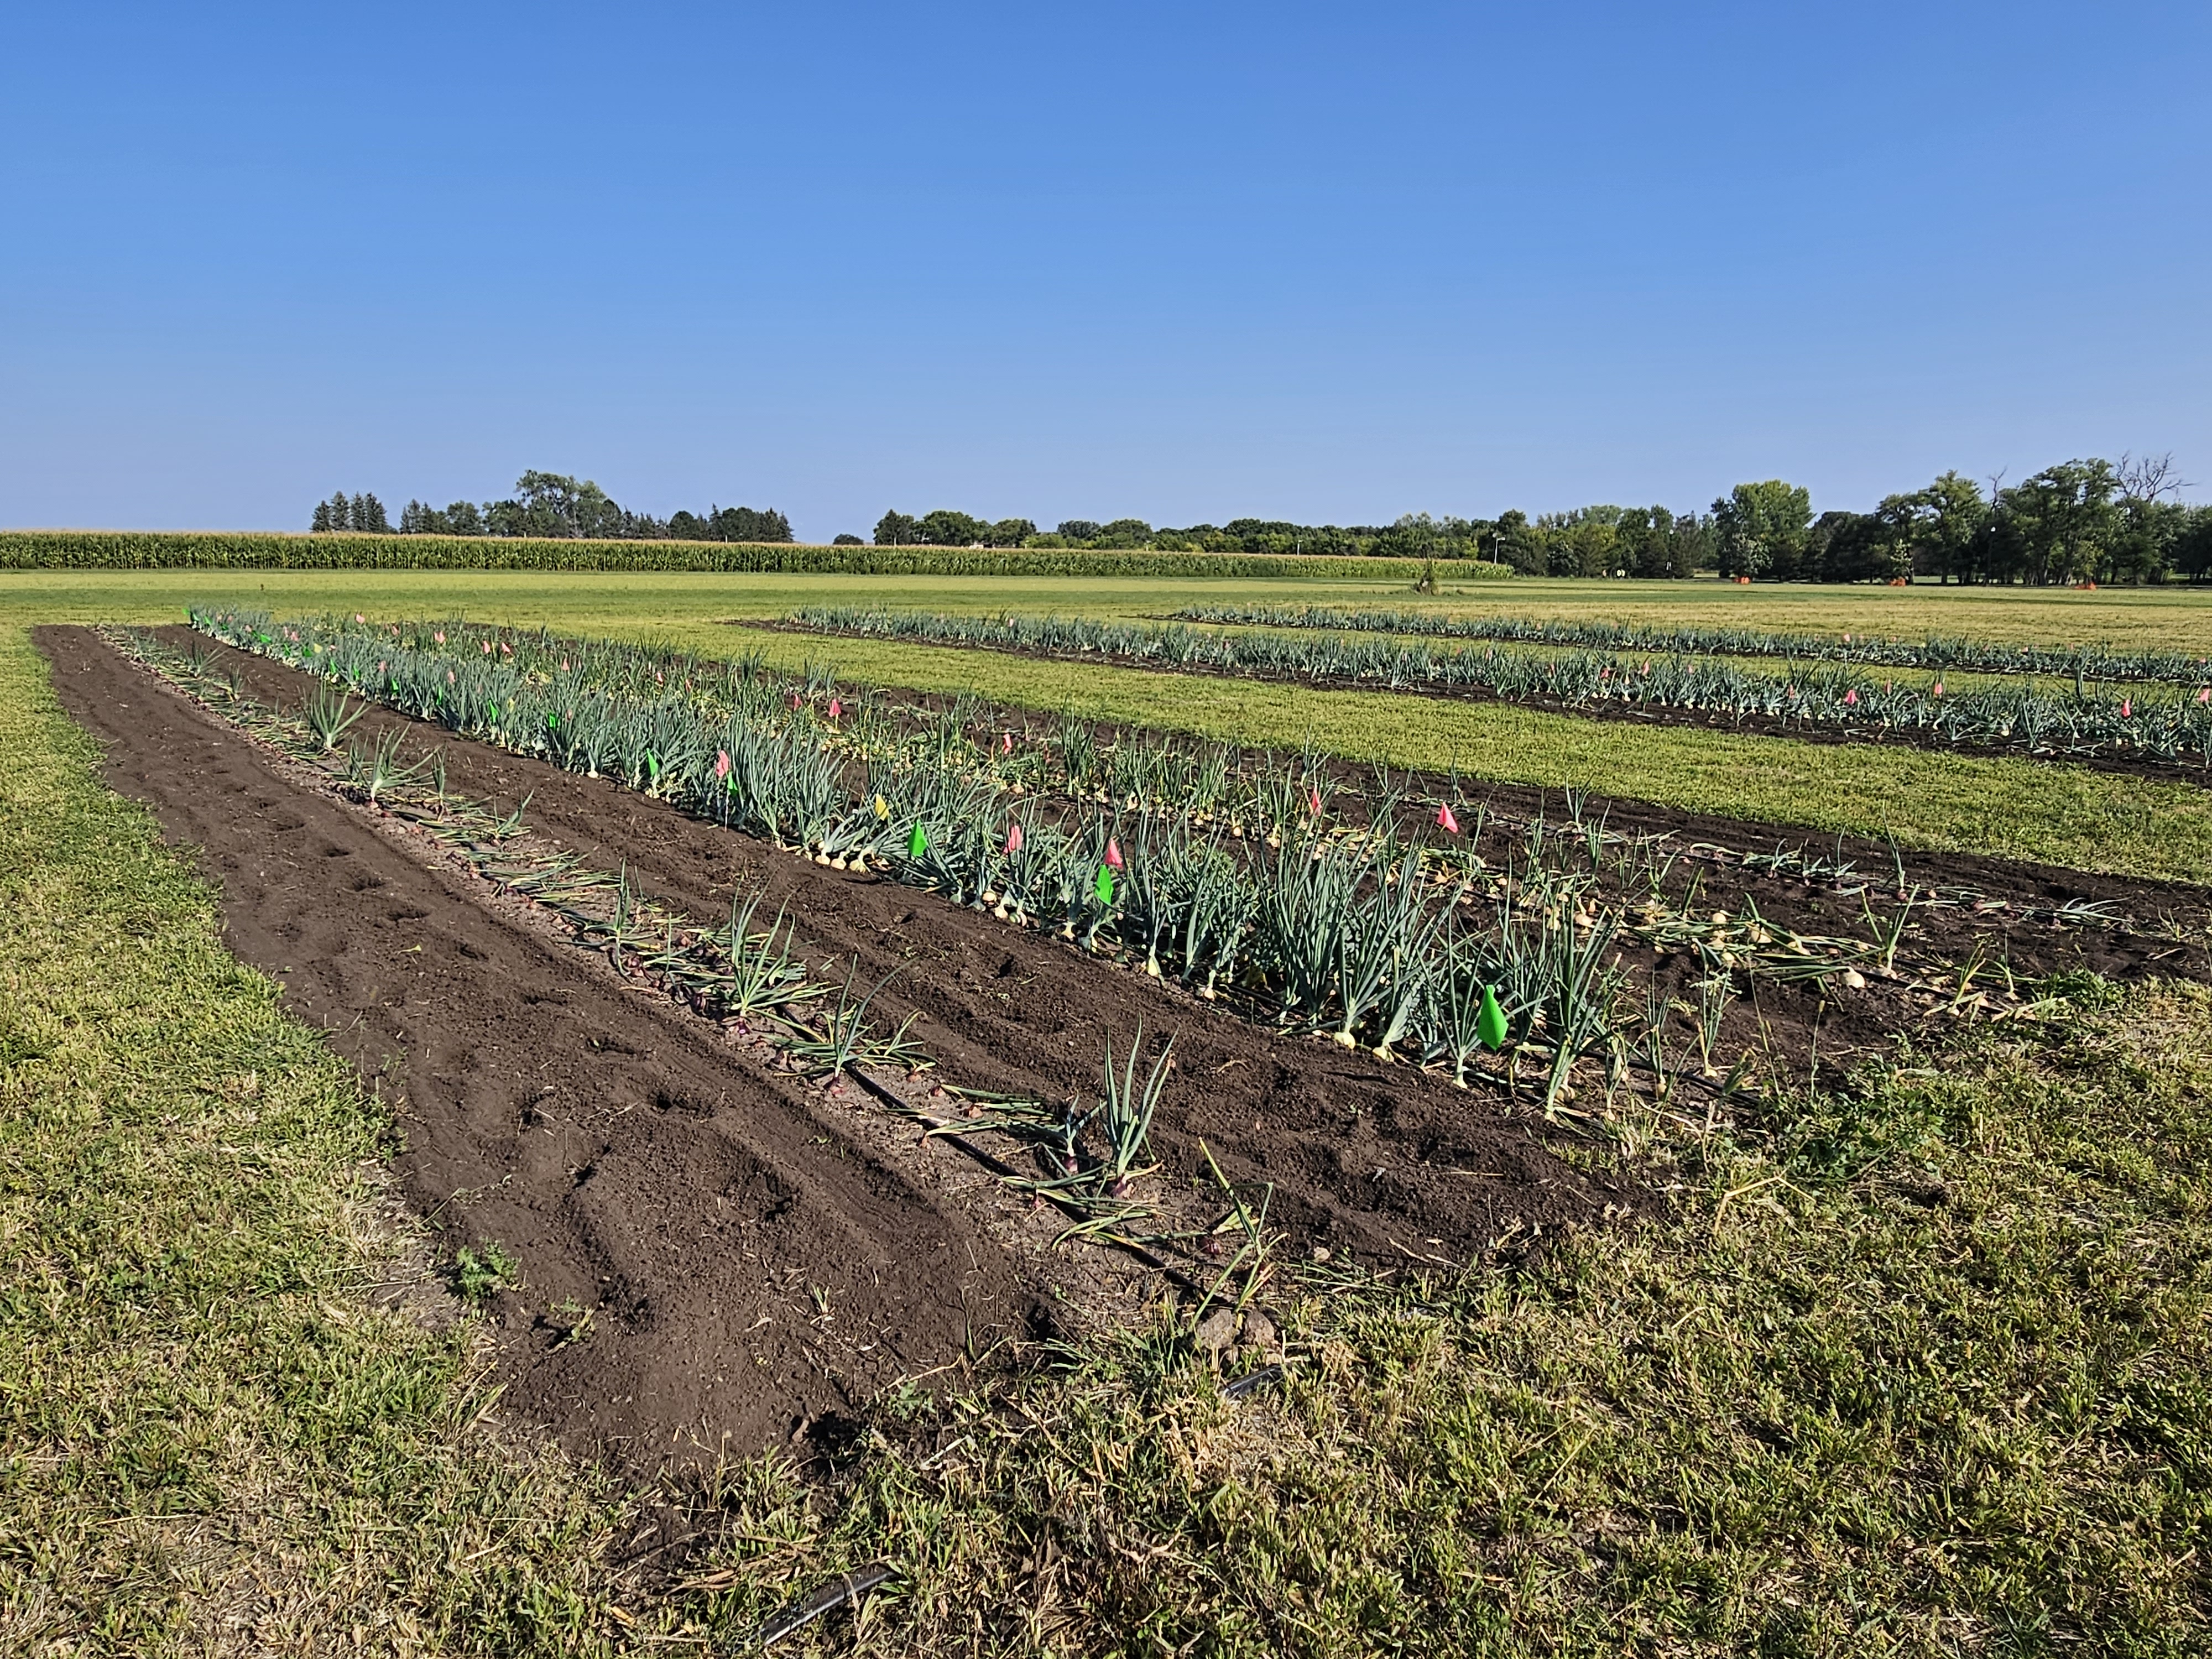 Rows of specialty crops are shown in a field